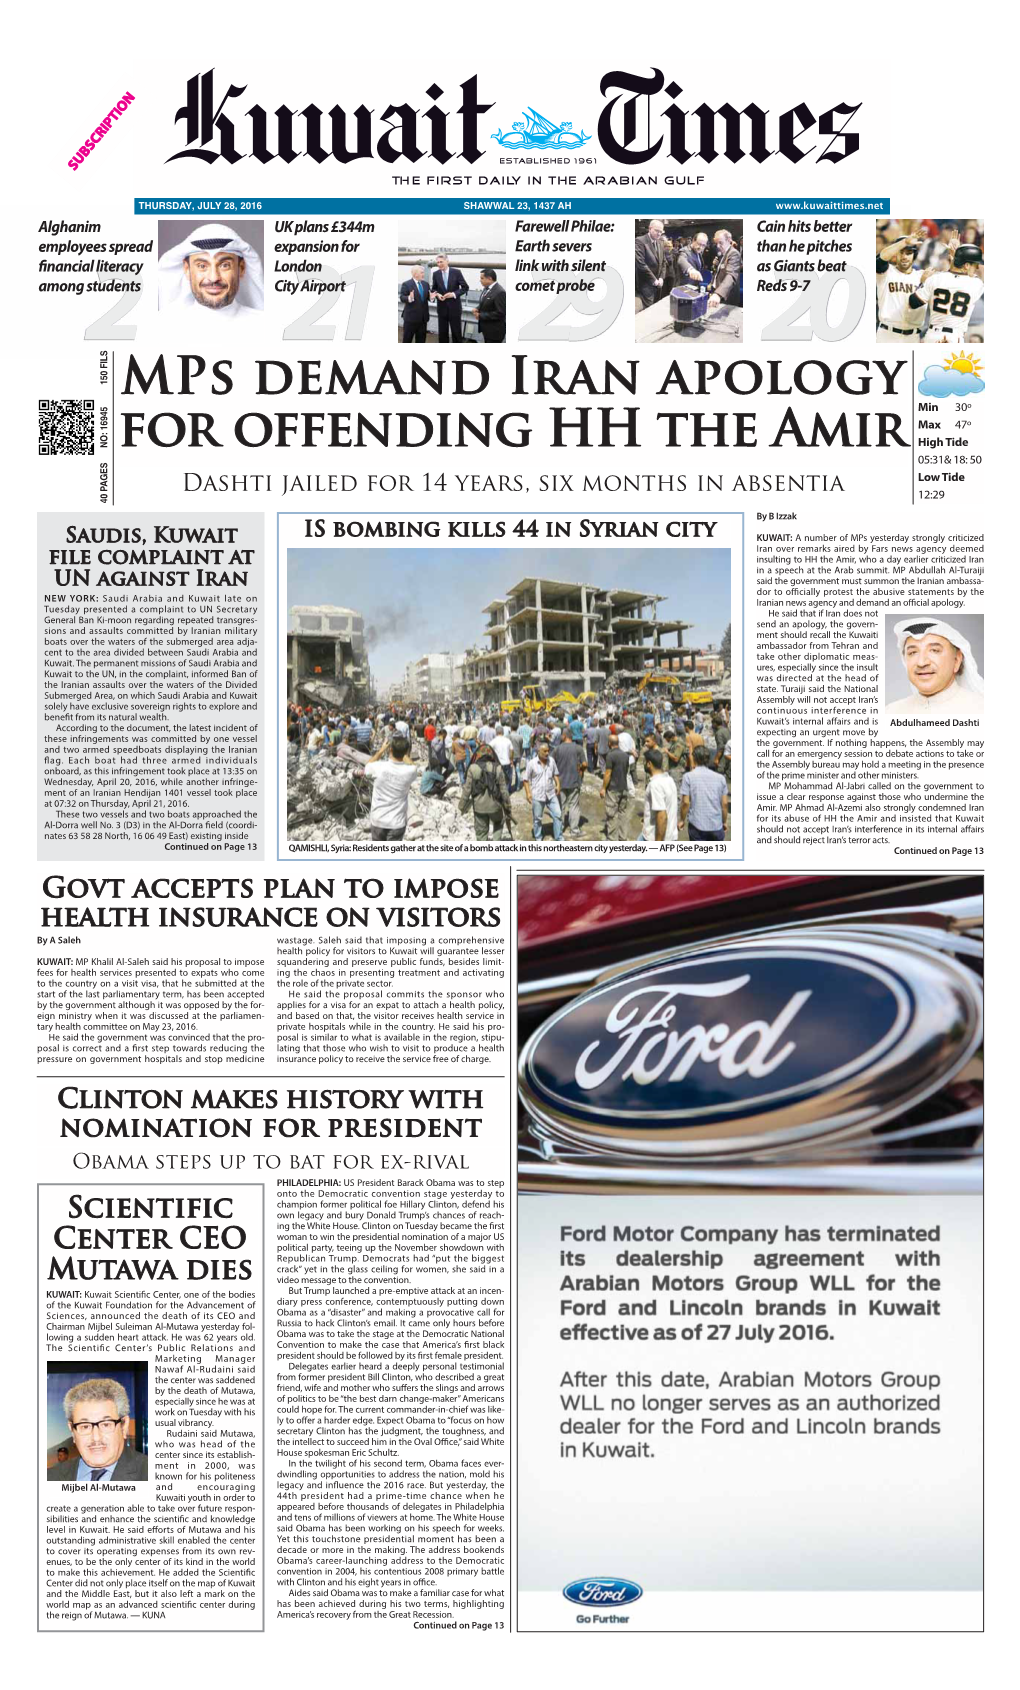 Mps Demand Iran Apology for Offending HH the Amir